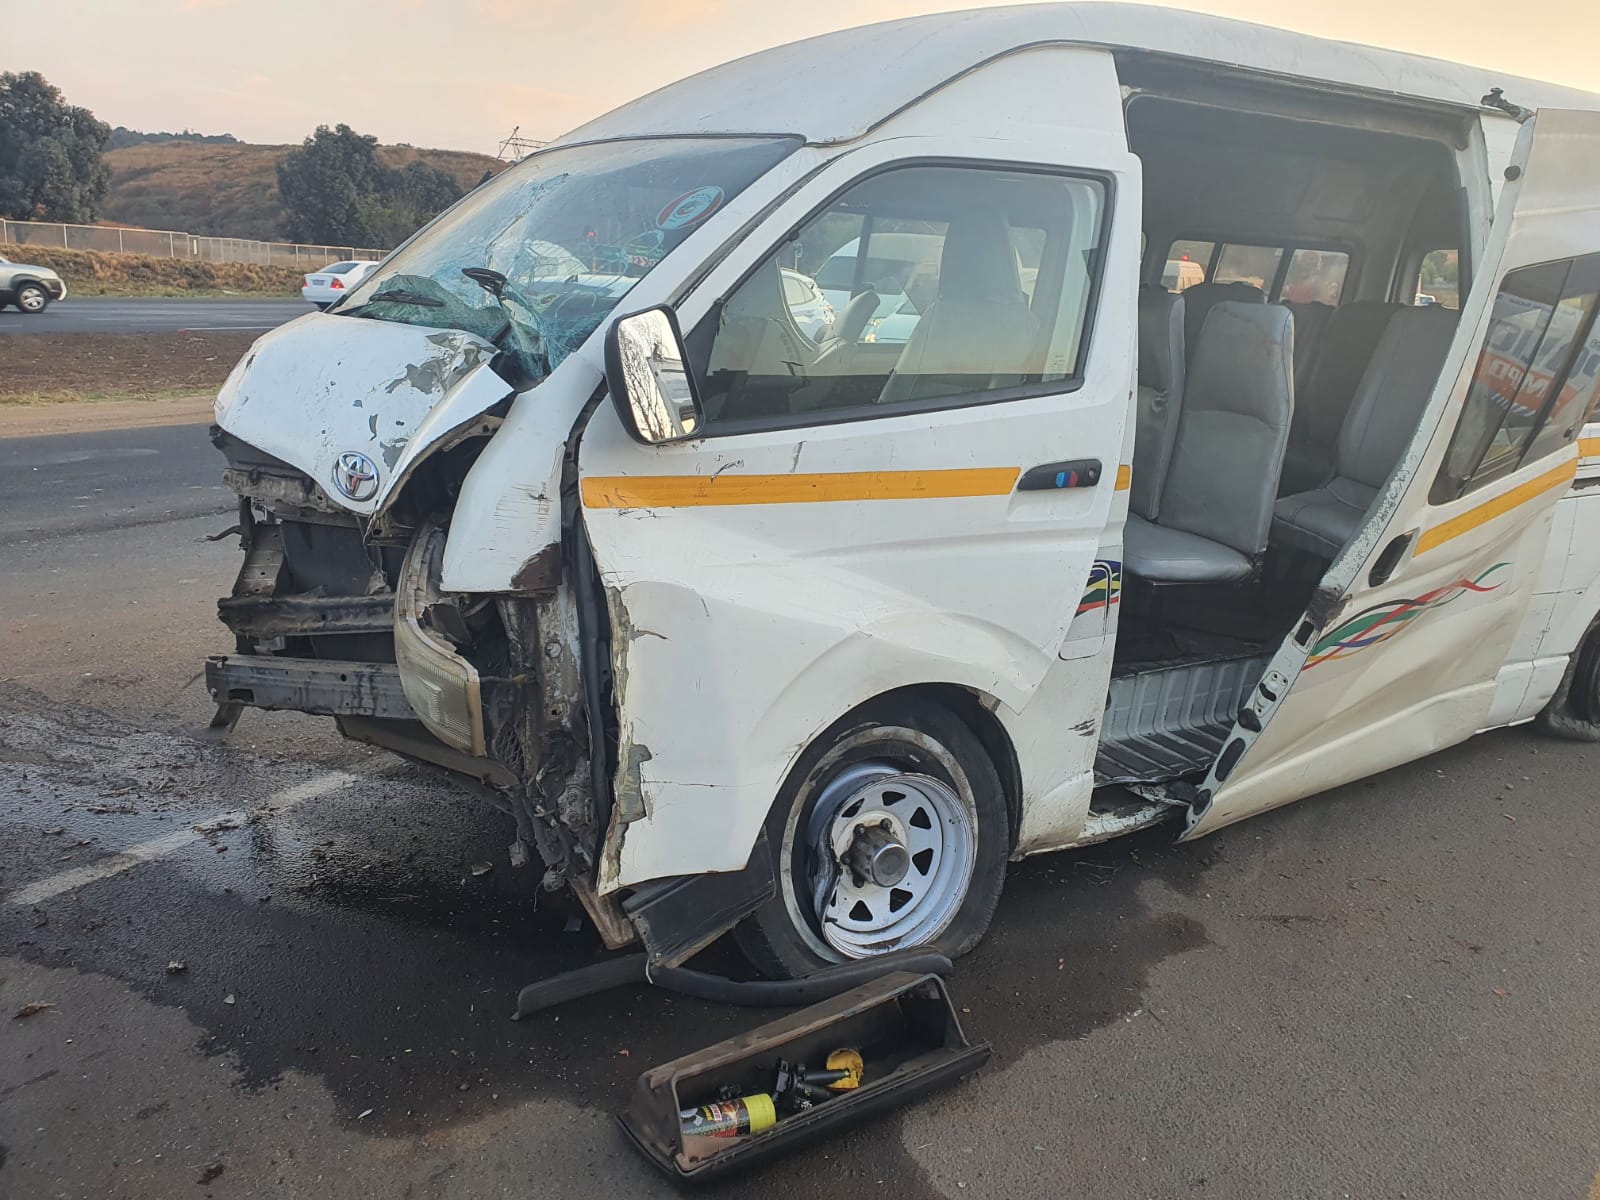 Several injured in a collision, Kempton Park